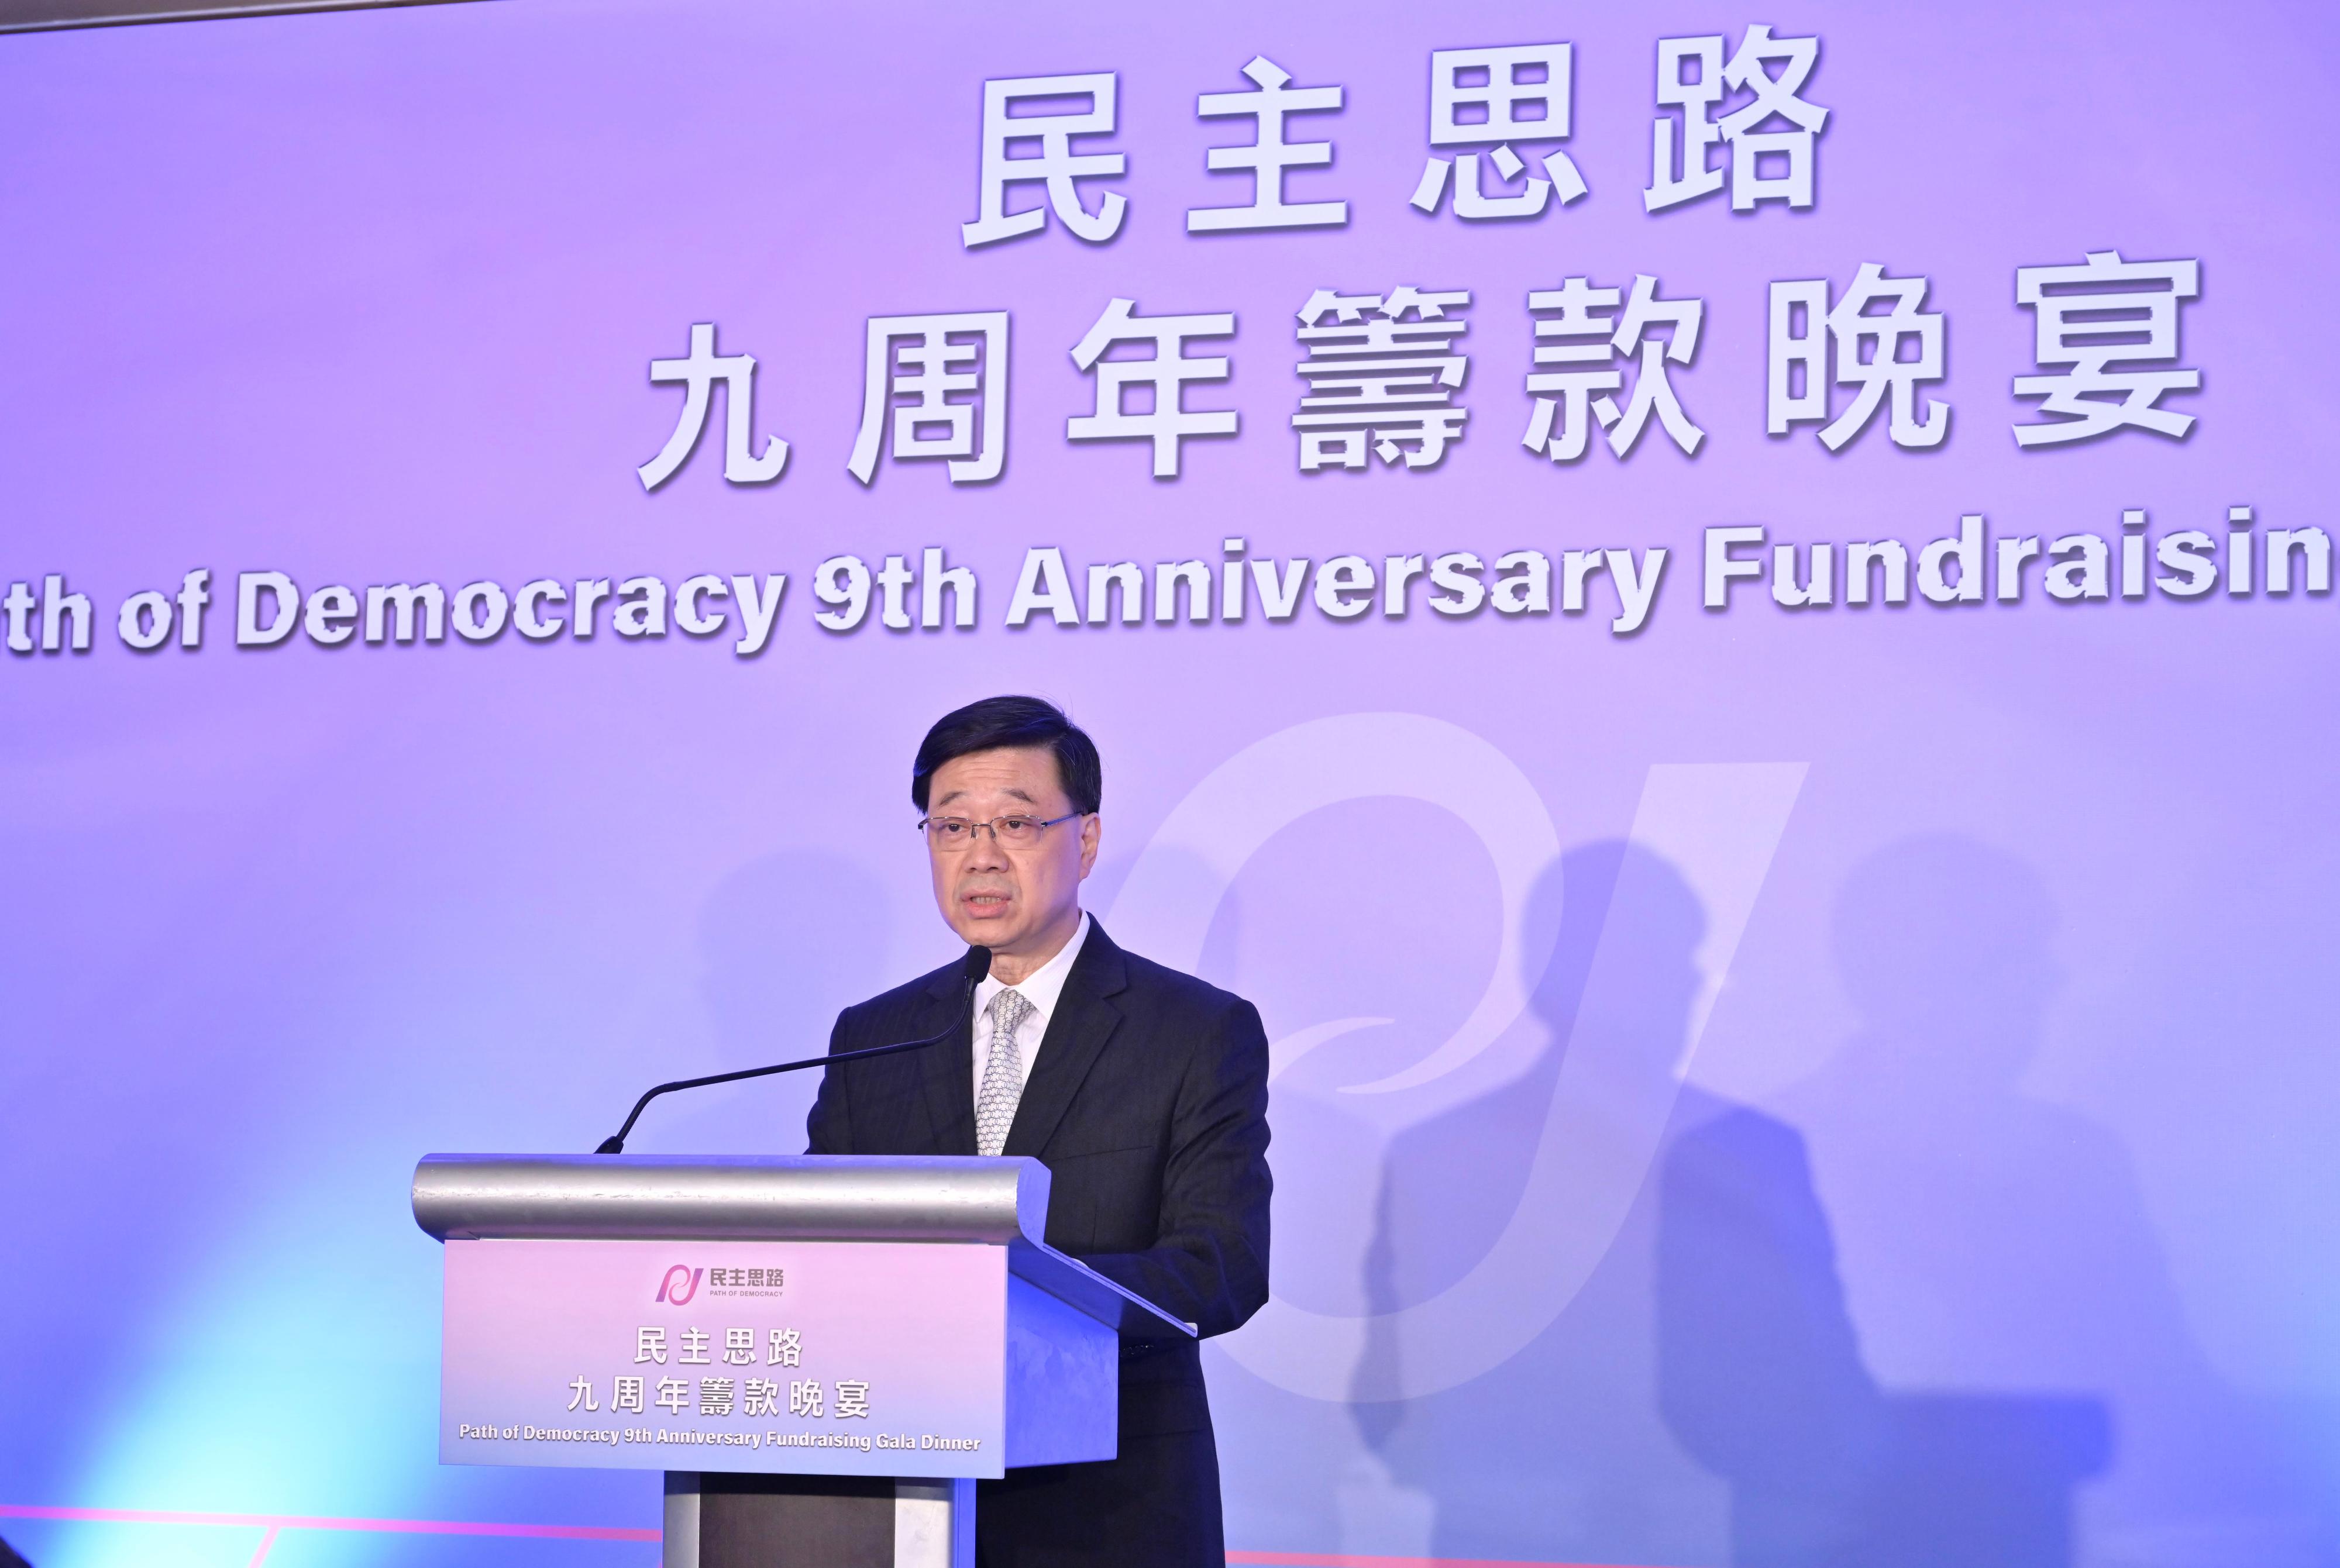 The Chief Executive, Mr John Lee, speaks at the Path of Democracy 9th Anniversary Fundraising Gala Dinner today (June 6).